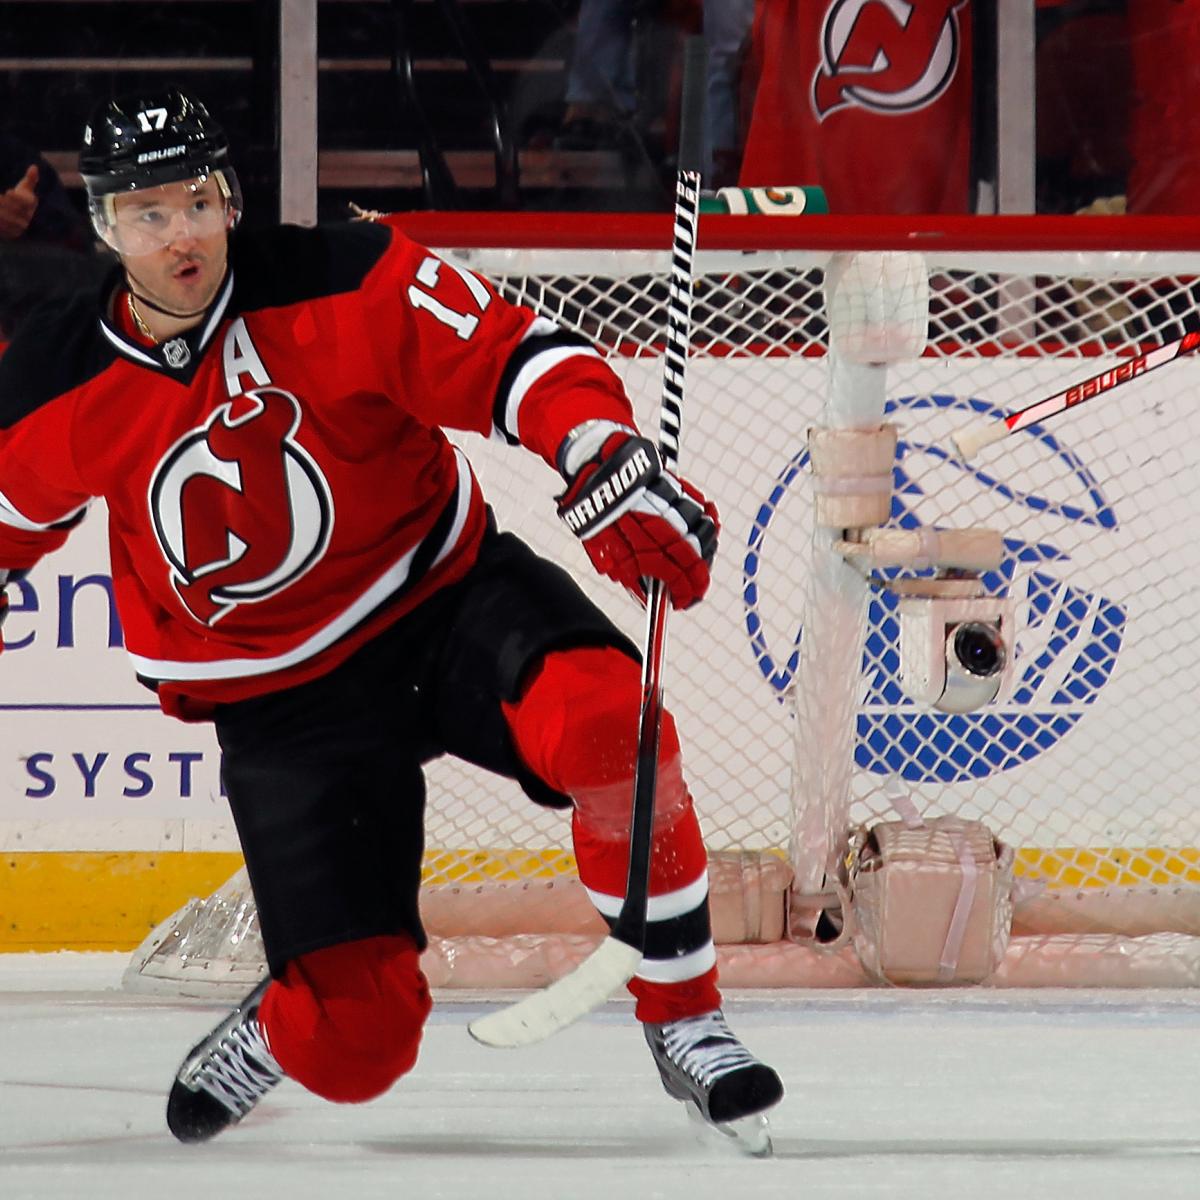 New Jersey Devils Top 25 Prospects At Midseason